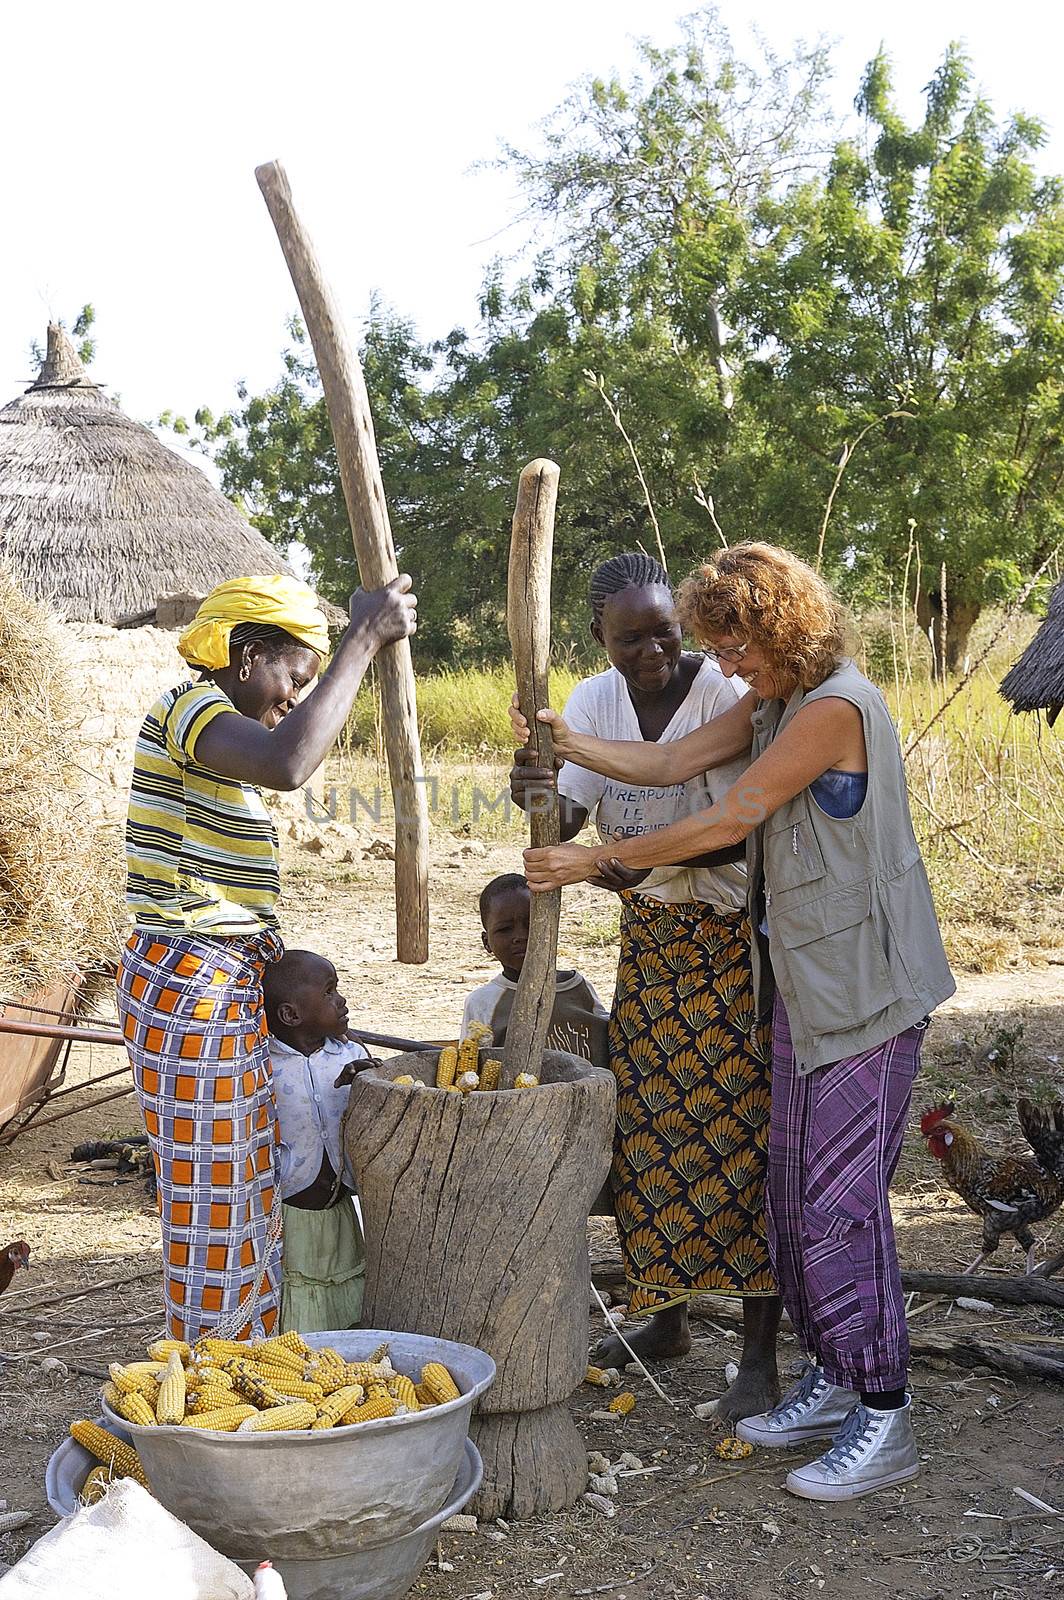 a French tourist participates in folding corn in good spirits with women from a village in Burkina Faso